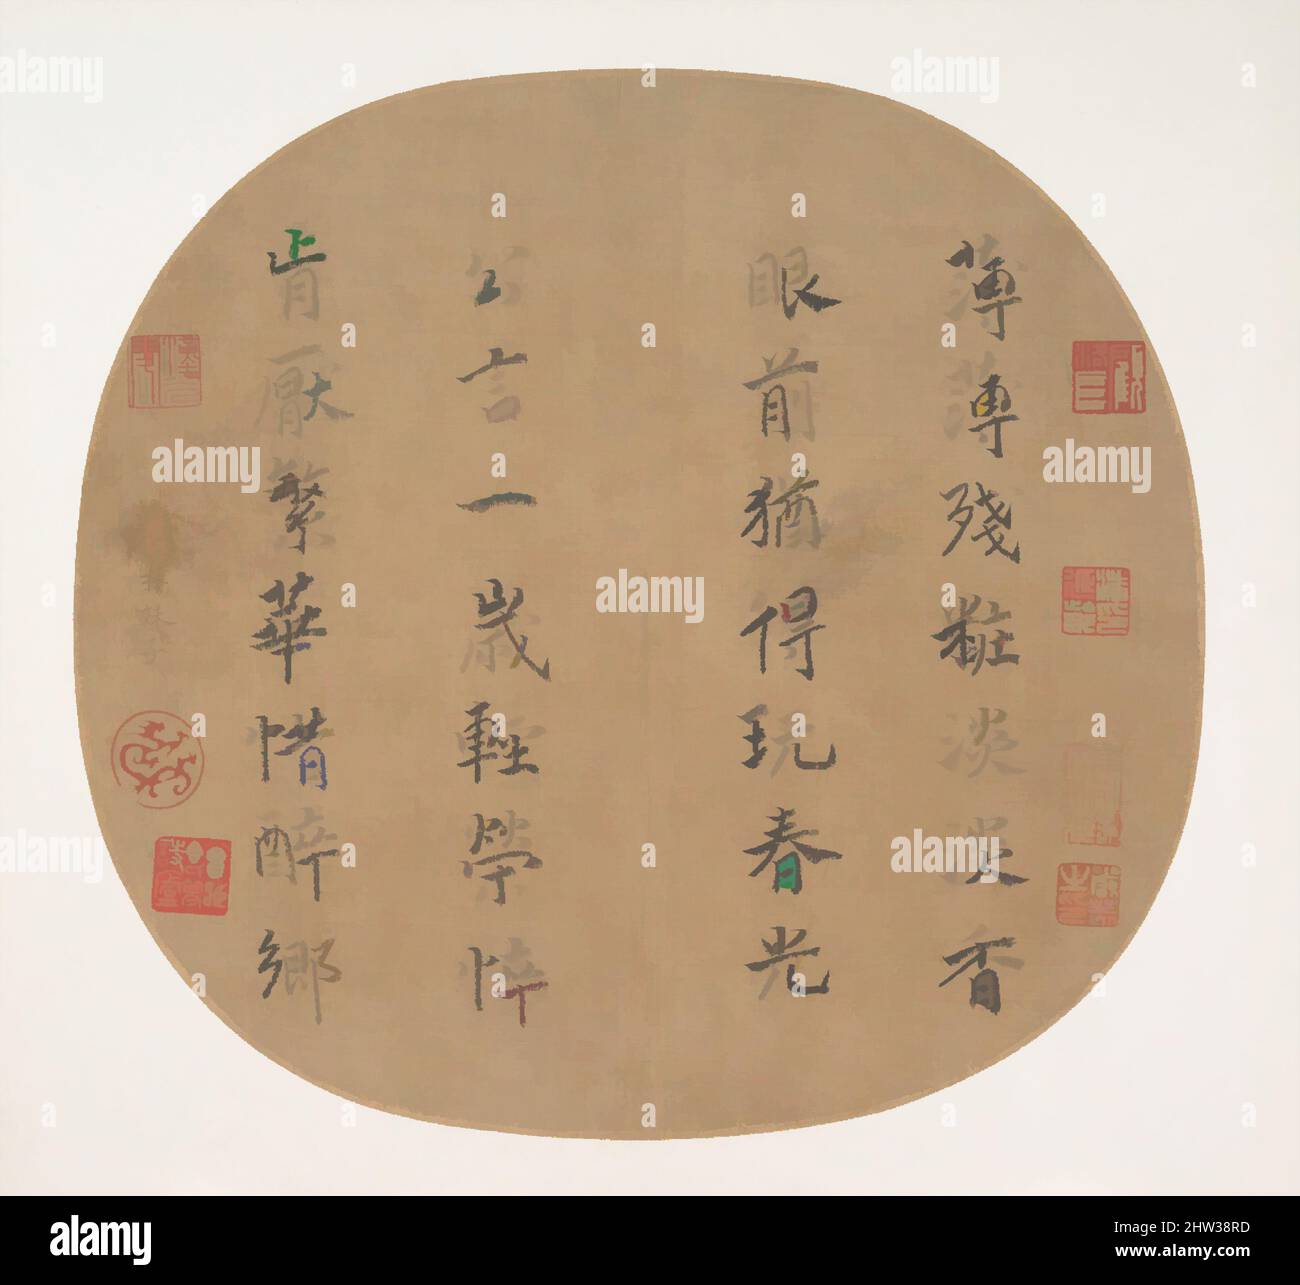 Art inspired by 南宋 楊皇后 楷書薄薄殘妝七絕 團扇冊頁 絹本, Quatrain on spring’s radiance, Southern Song dynasty (1127–1279), early 13th century, China, Round fan mounted as an album leaf; ink on silk, Image: 9 1/8 x 9 5/8 in. (23.2 x 24.4 cm), Calligraphy, Empress Yang Meizi (Chinese, 1162–1232), During, Classic works modernized by Artotop with a splash of modernity. Shapes, color and value, eye-catching visual impact on art. Emotions through freedom of artworks in a contemporary way. A timeless message pursuing a wildly creative new direction. Artists turning to the digital medium and creating the Artotop NFT Stock Photo